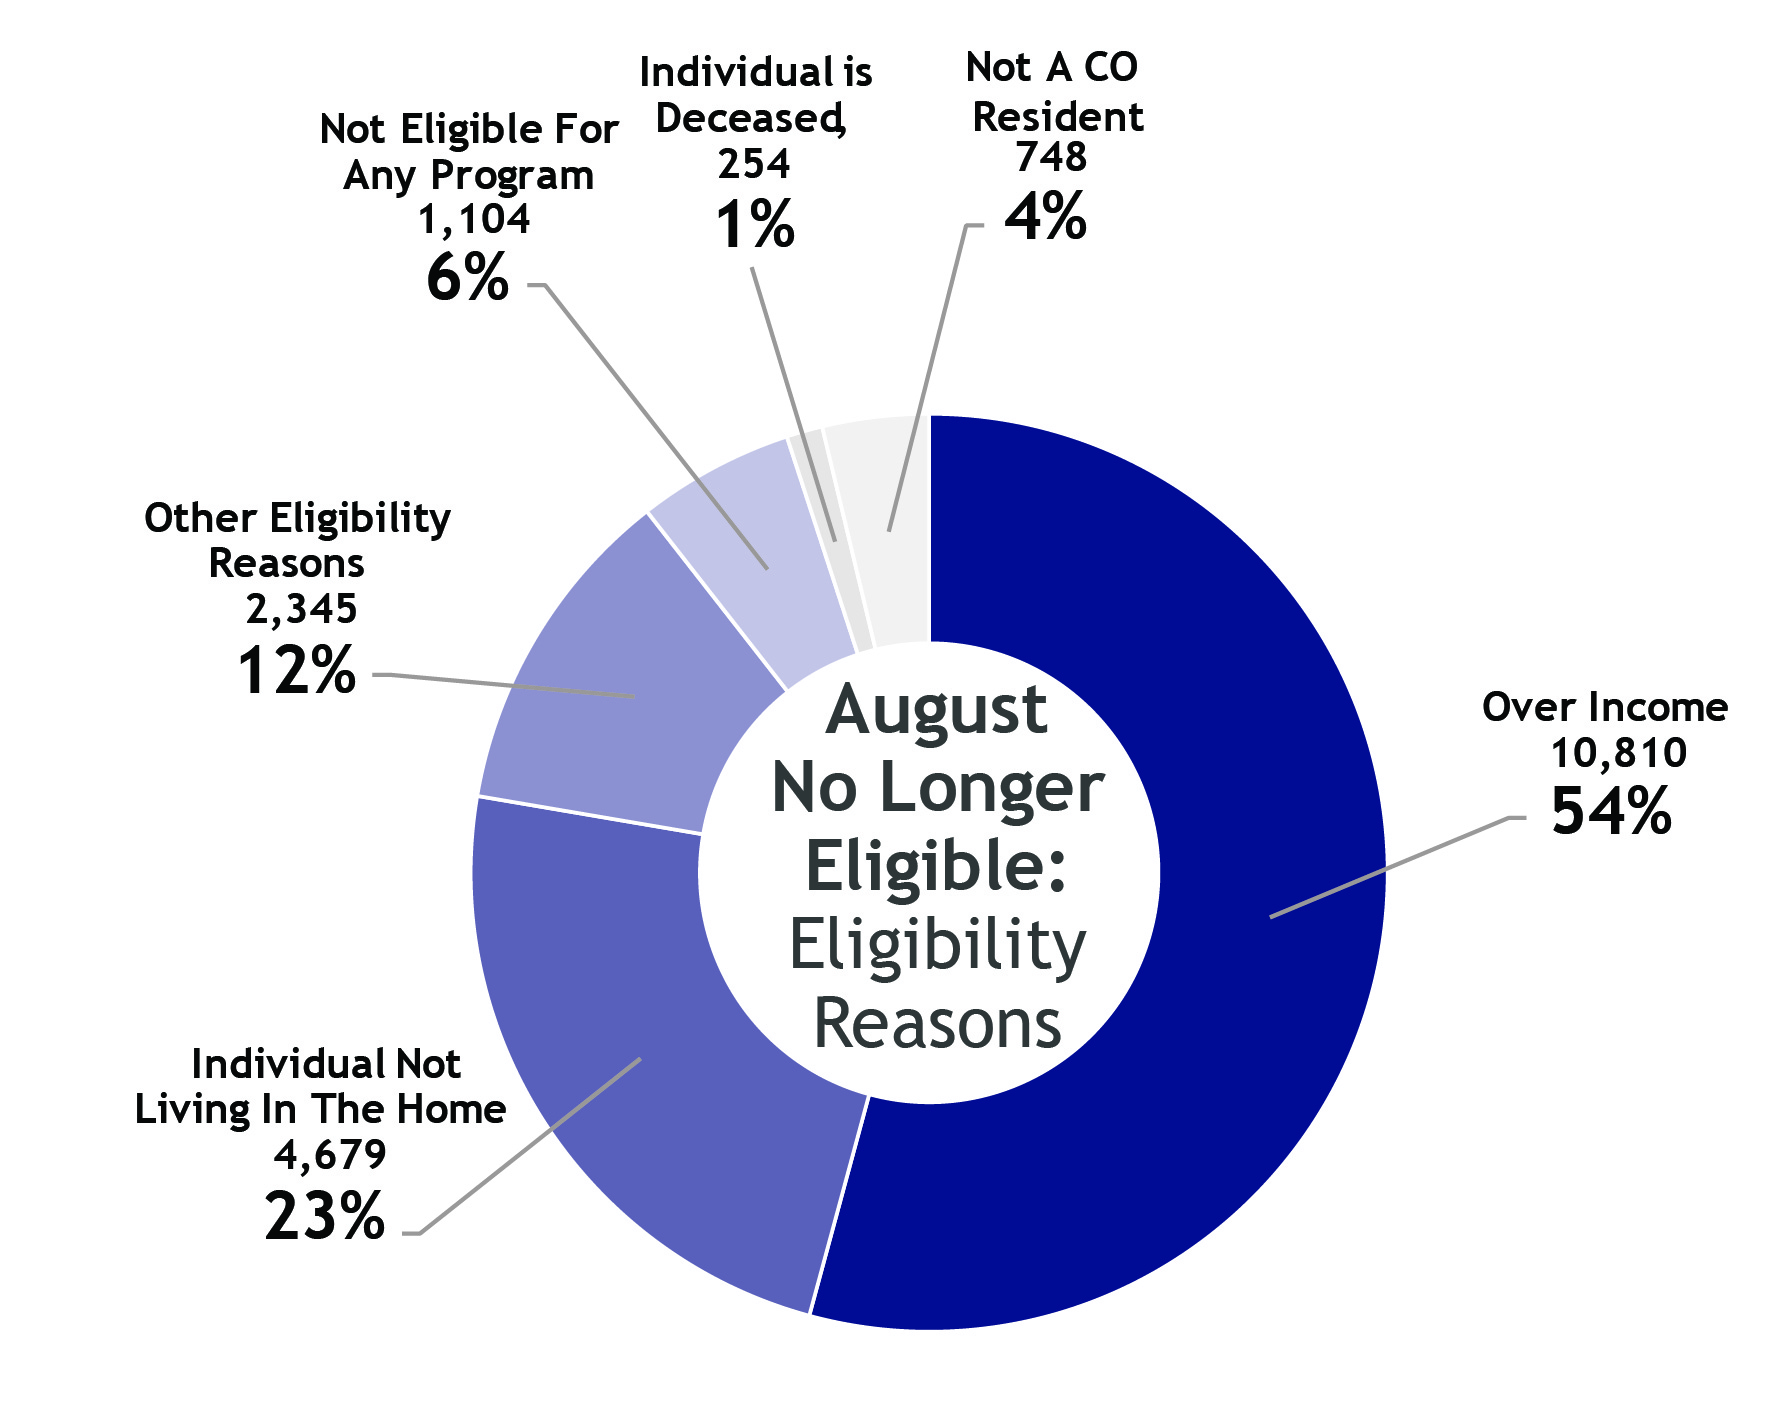 Donut chart showing detail of August Renewals section of No Longer Eligible for Eligibility Reasons with over income 10,810 the largest at 54%, Individual not living in the home 4679 at 23%, other eligibility reasons 2,345 at 12%, not eligible for any program 1,104 at 6%, individual is deceased 254 at 1% and not a Colorado resident 748 at 4%.